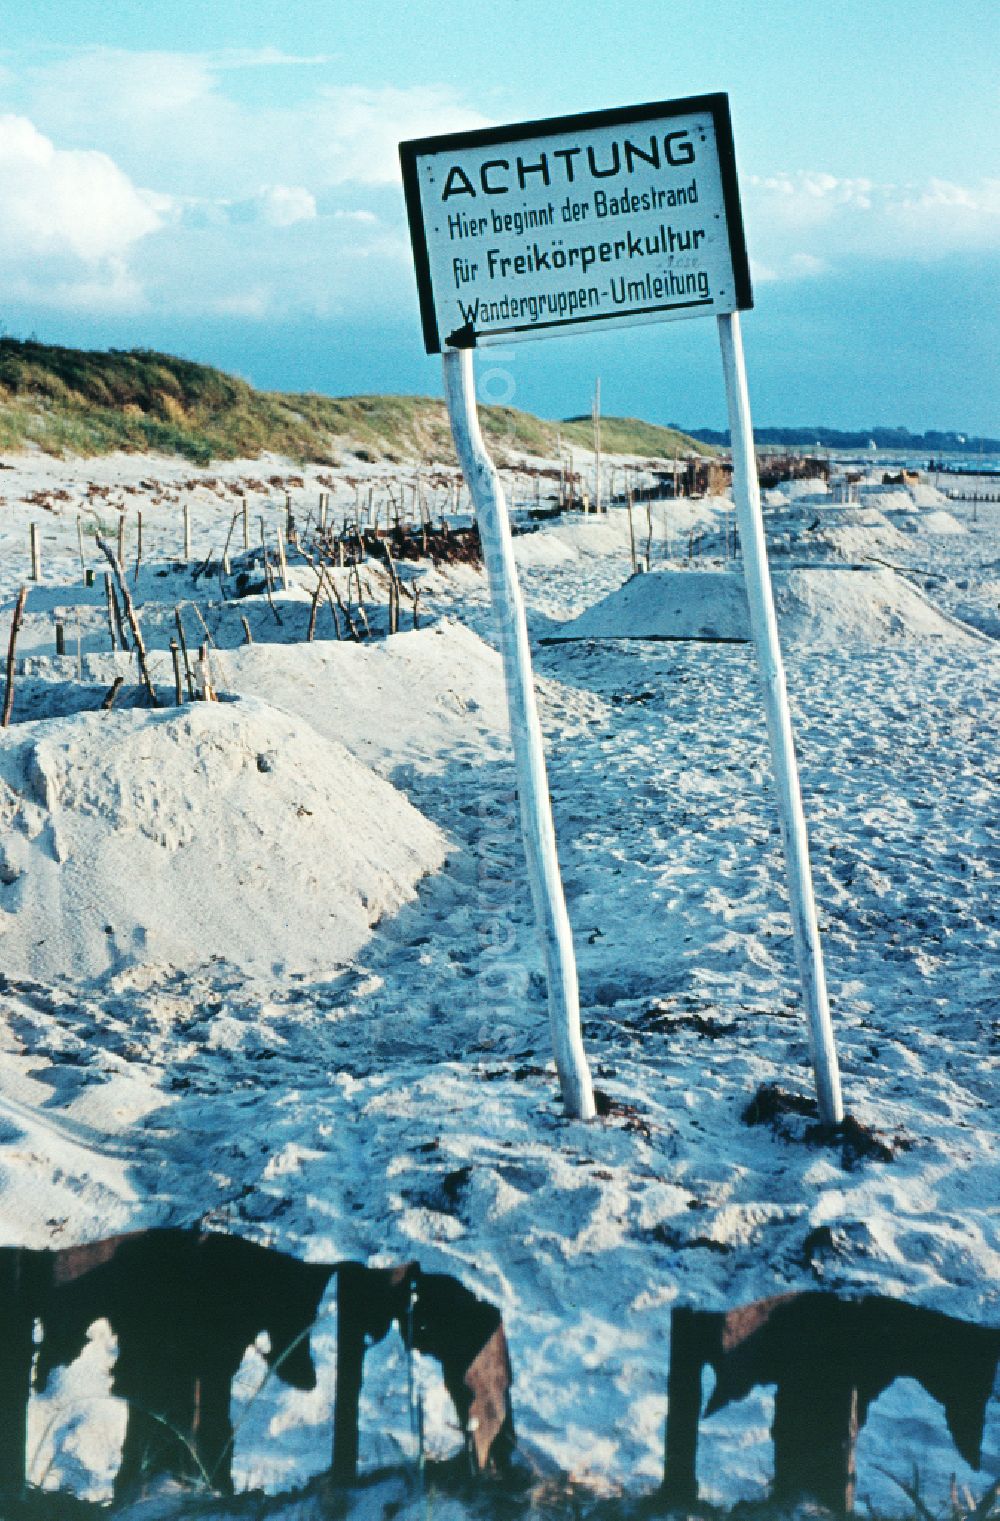 Ibenhorst a. Darß: Warning sign: Caution The bathing beach for nudist culture begins here - hiking groups detour to the sandy beach of the Baltic Sea in Ibenhorst a. Darss, Mecklenburg-Western Pomerania in the territory of the former GDR, German Democratic Republic